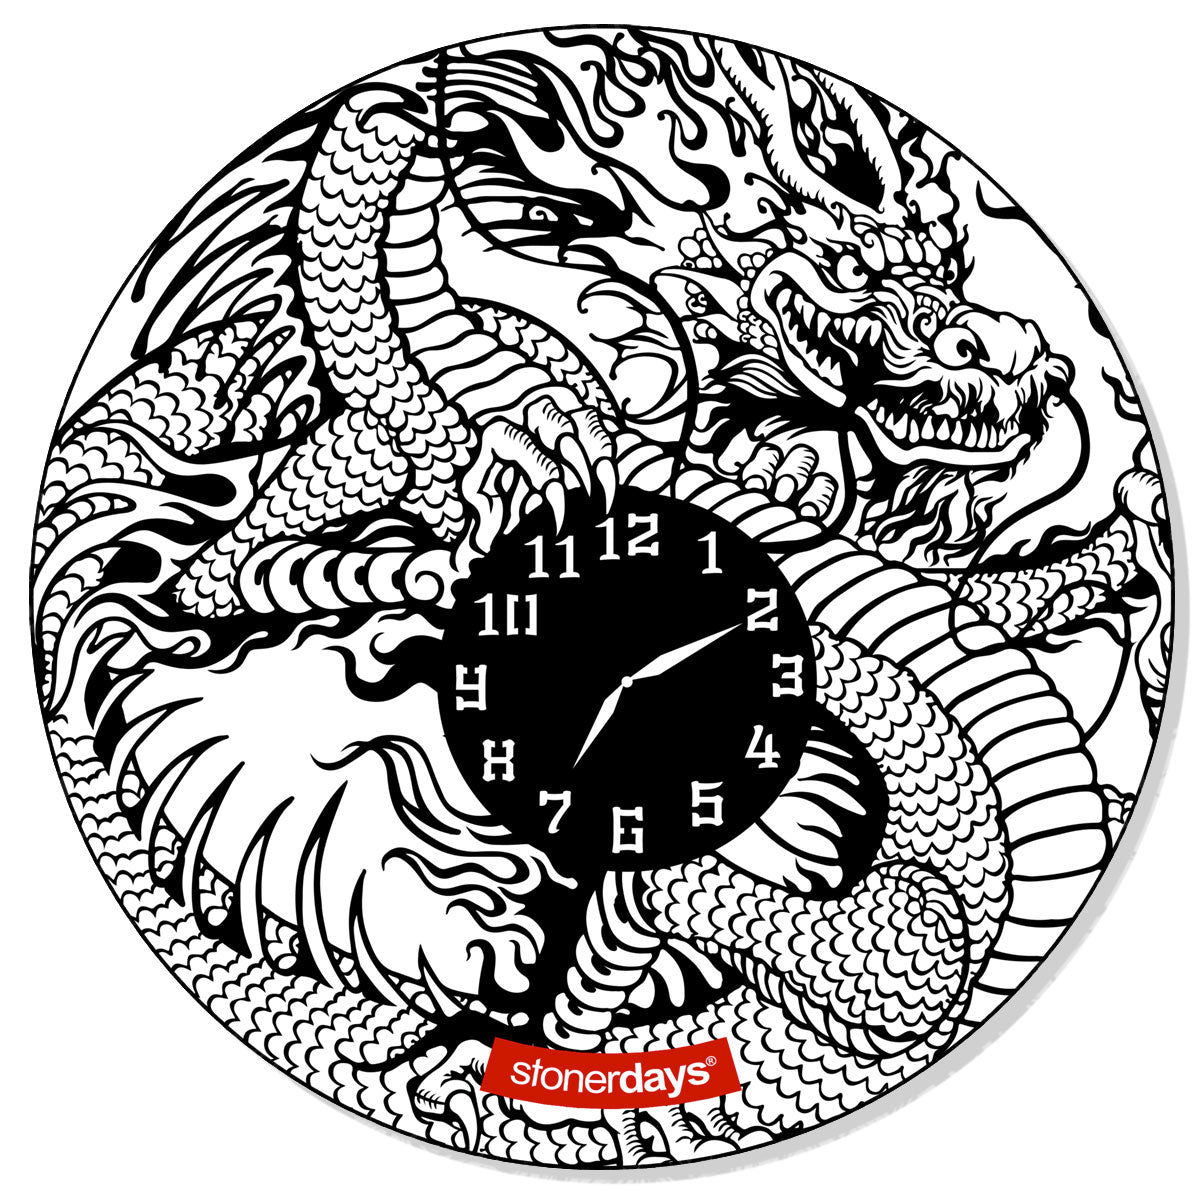 StonerDays 710 Dragon Creativity Mat with integrated clock, black and white design, top view